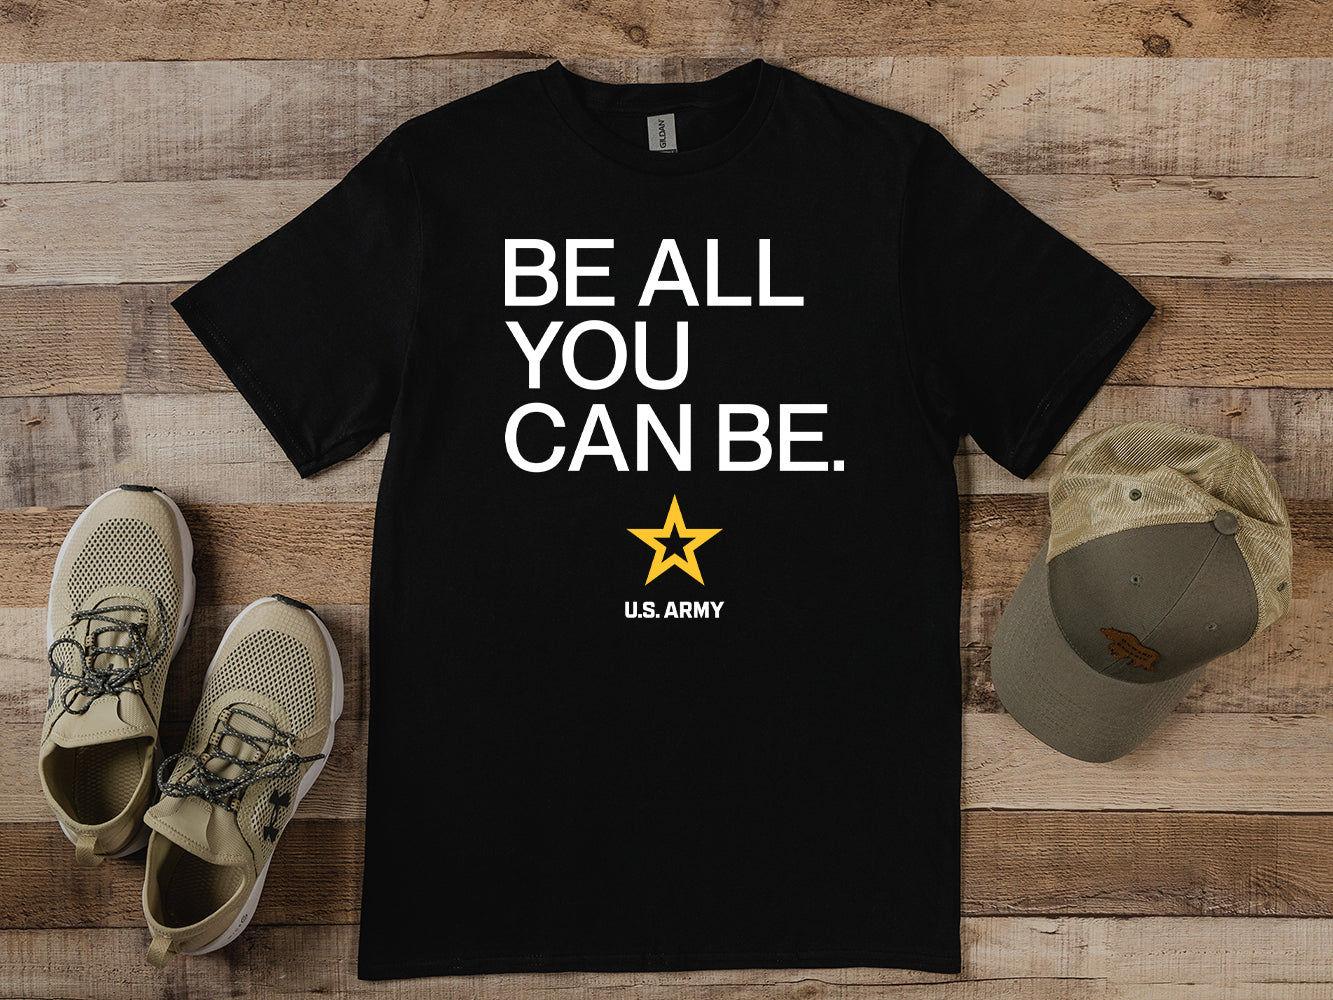 Officially Licensed U.S. Army, Be All You Can Be T-shirt